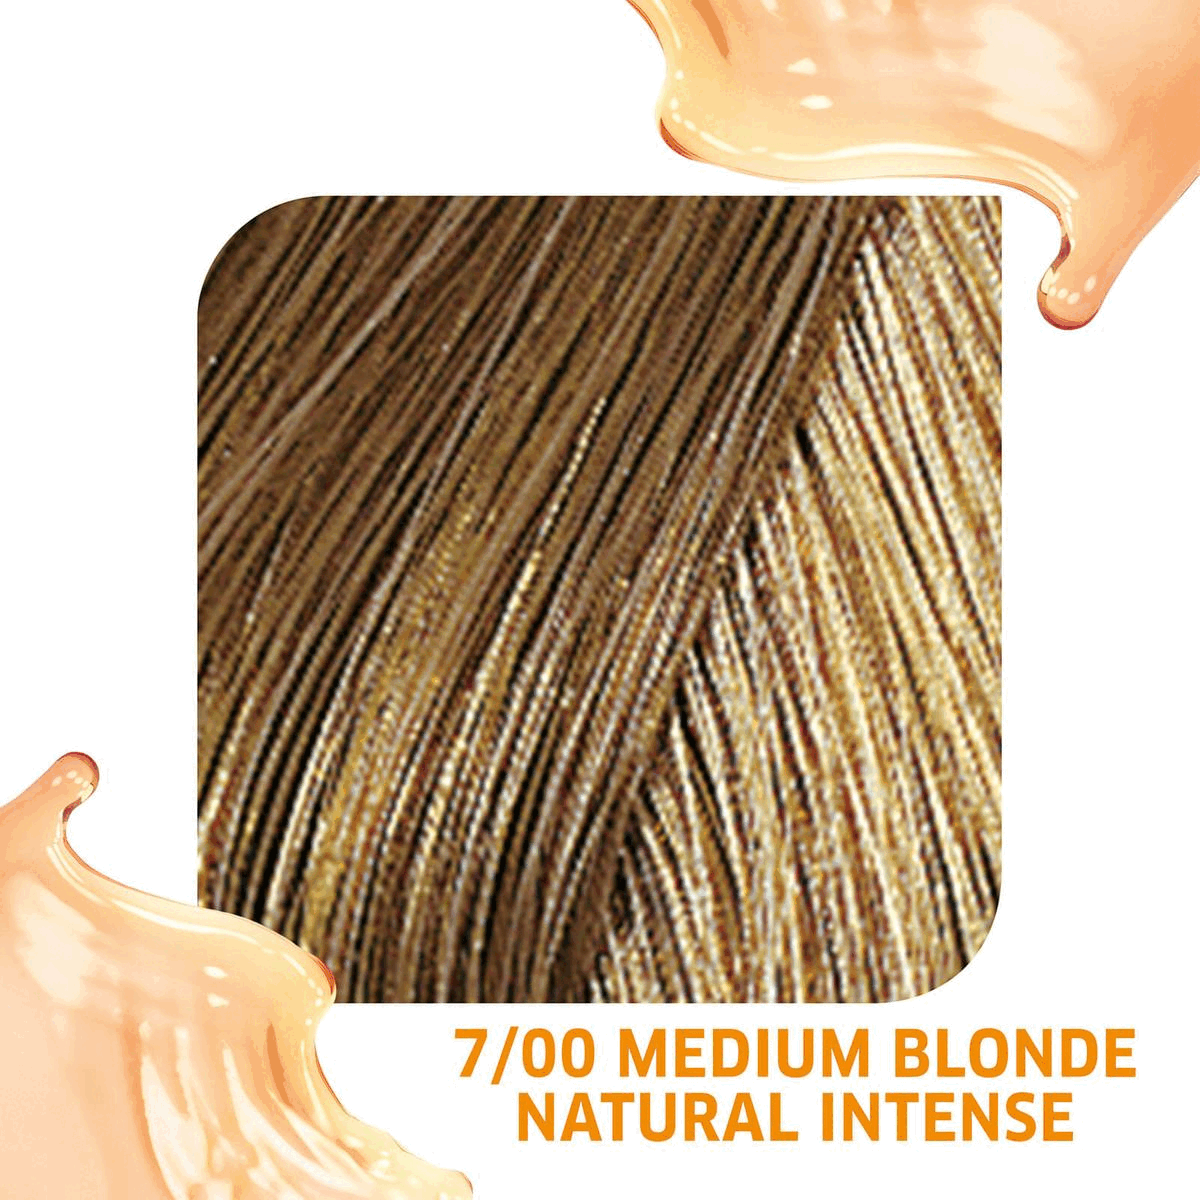 7/00 Medium Blonde Natural Intense  Semi-Permenant Colour enhance Direct Dies and Vitamin Care Complex Lasts Up to 10 Shampoos Colour, depth and tone Quick and Easy Application 
            